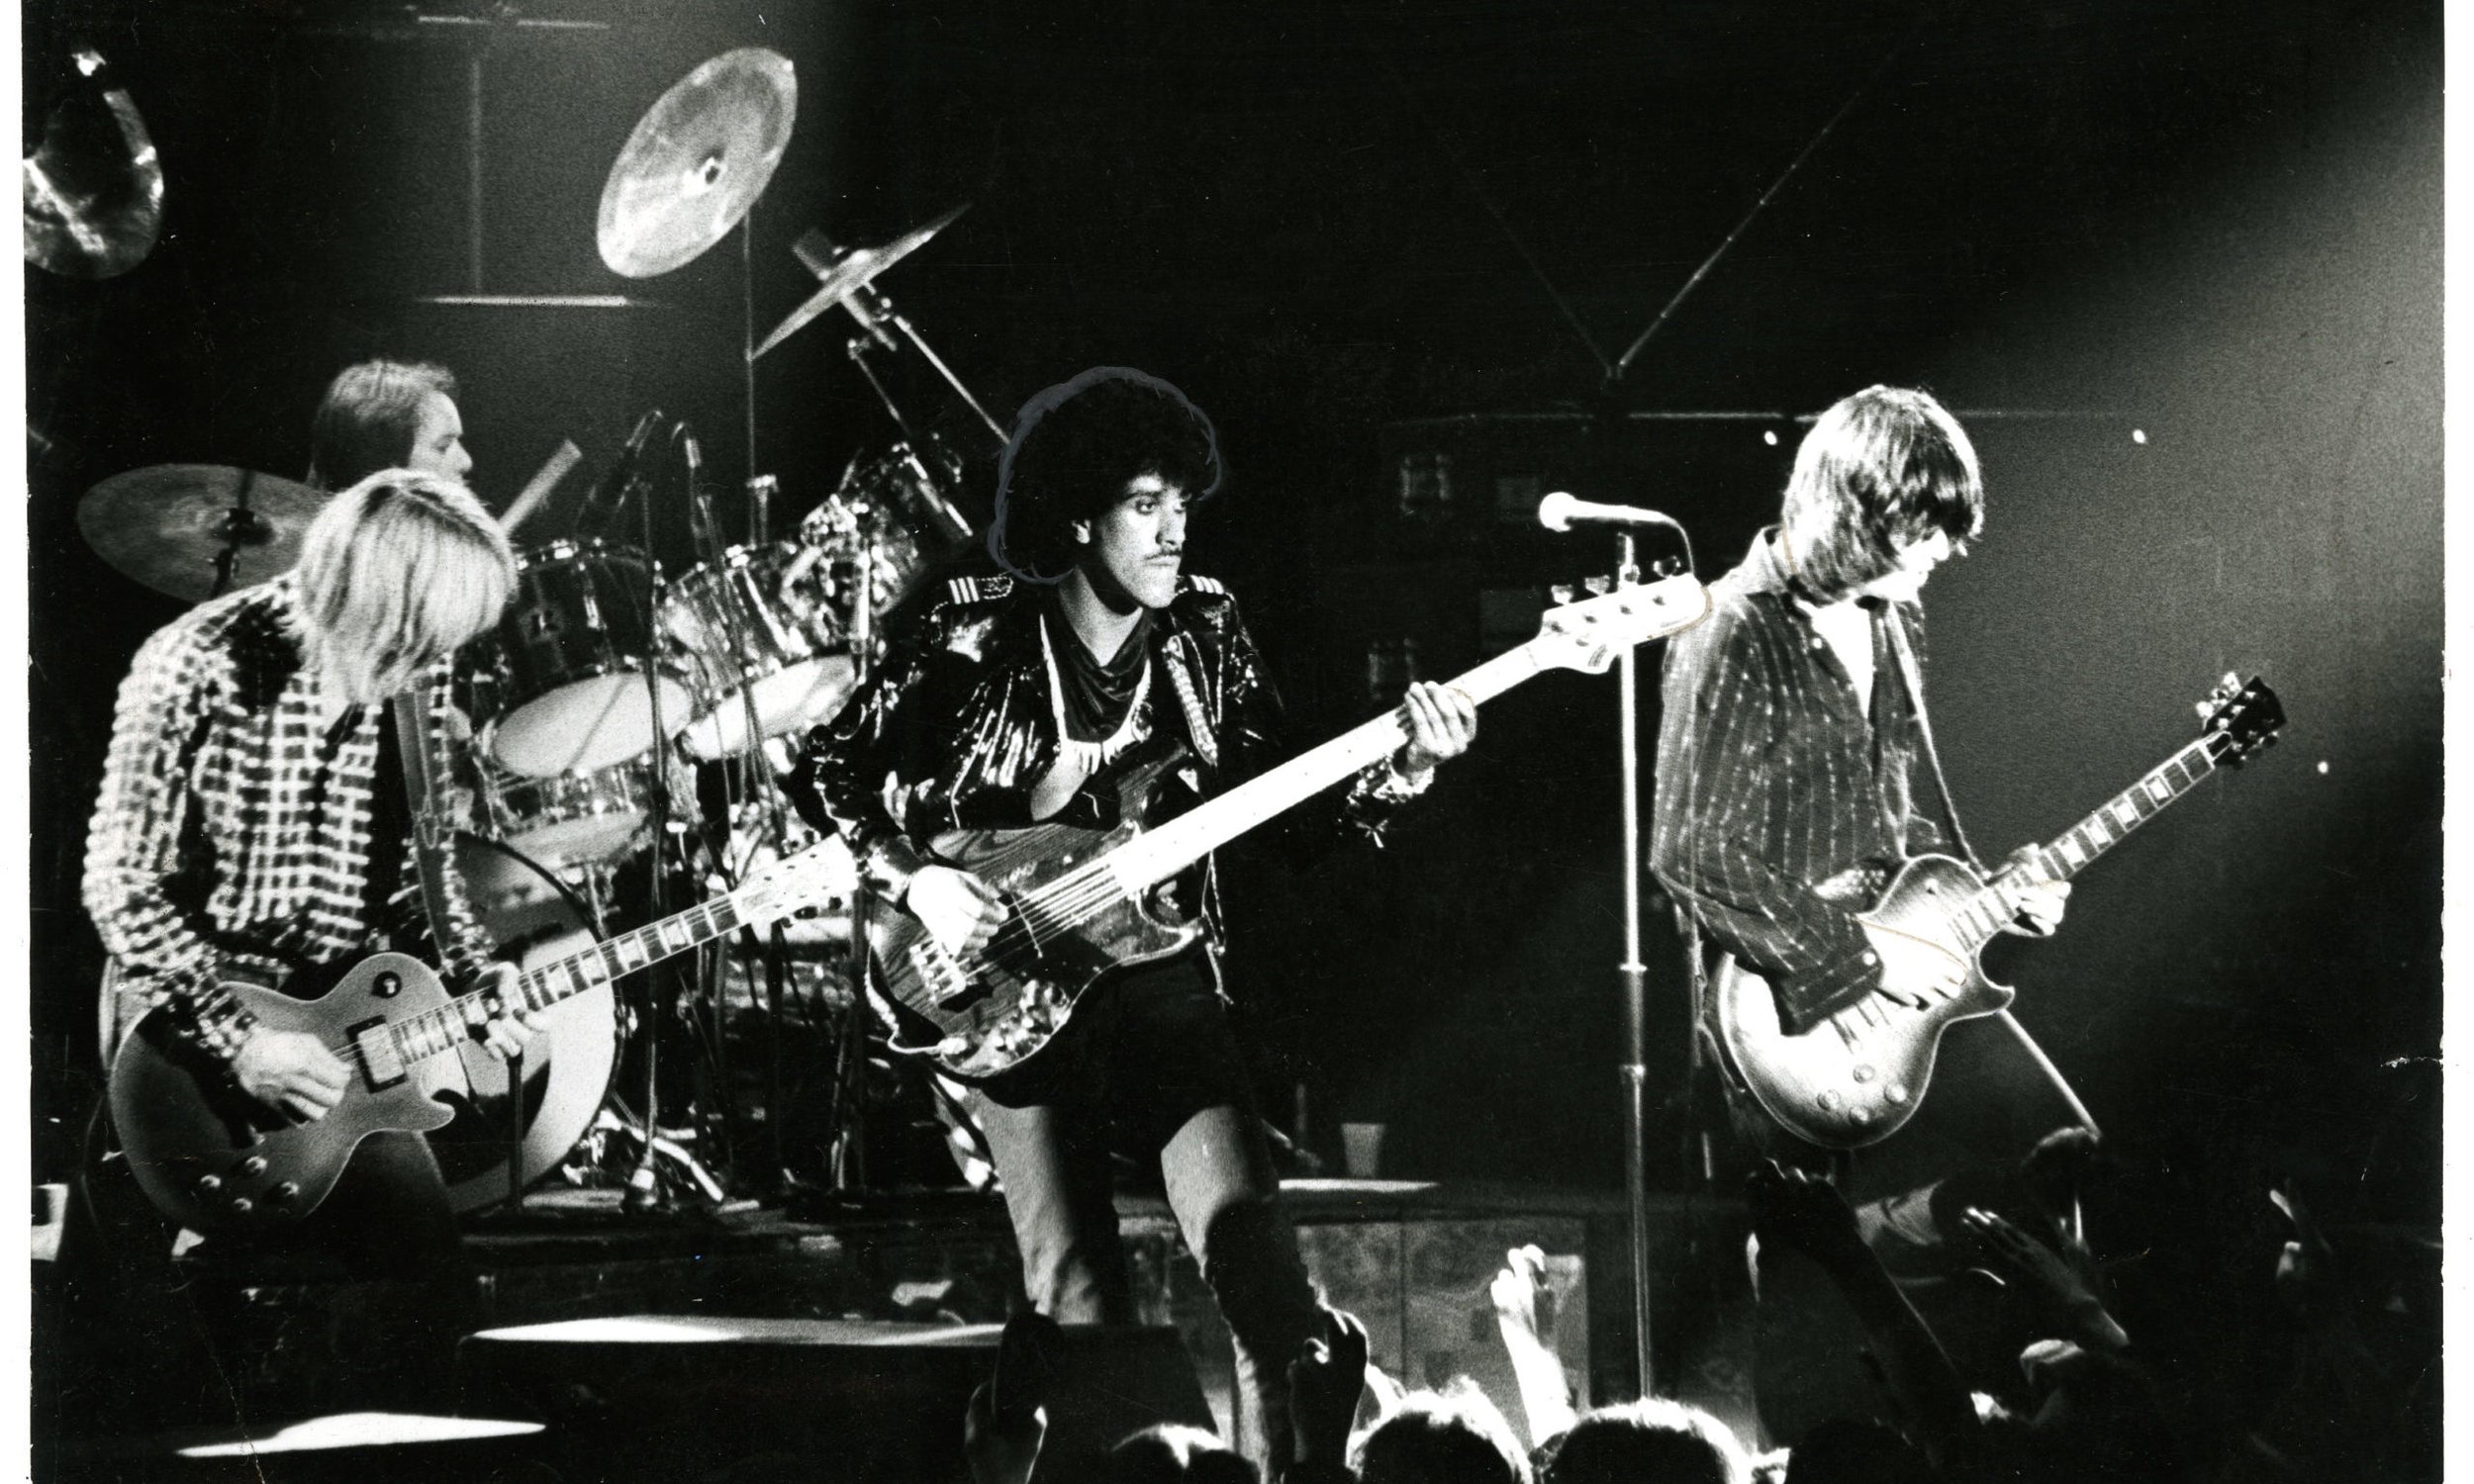 Lizzy-A1324-1980-05-04-Thin-Lizzy-in-Concert-CDCT-scaled-e1593171716900.jpg